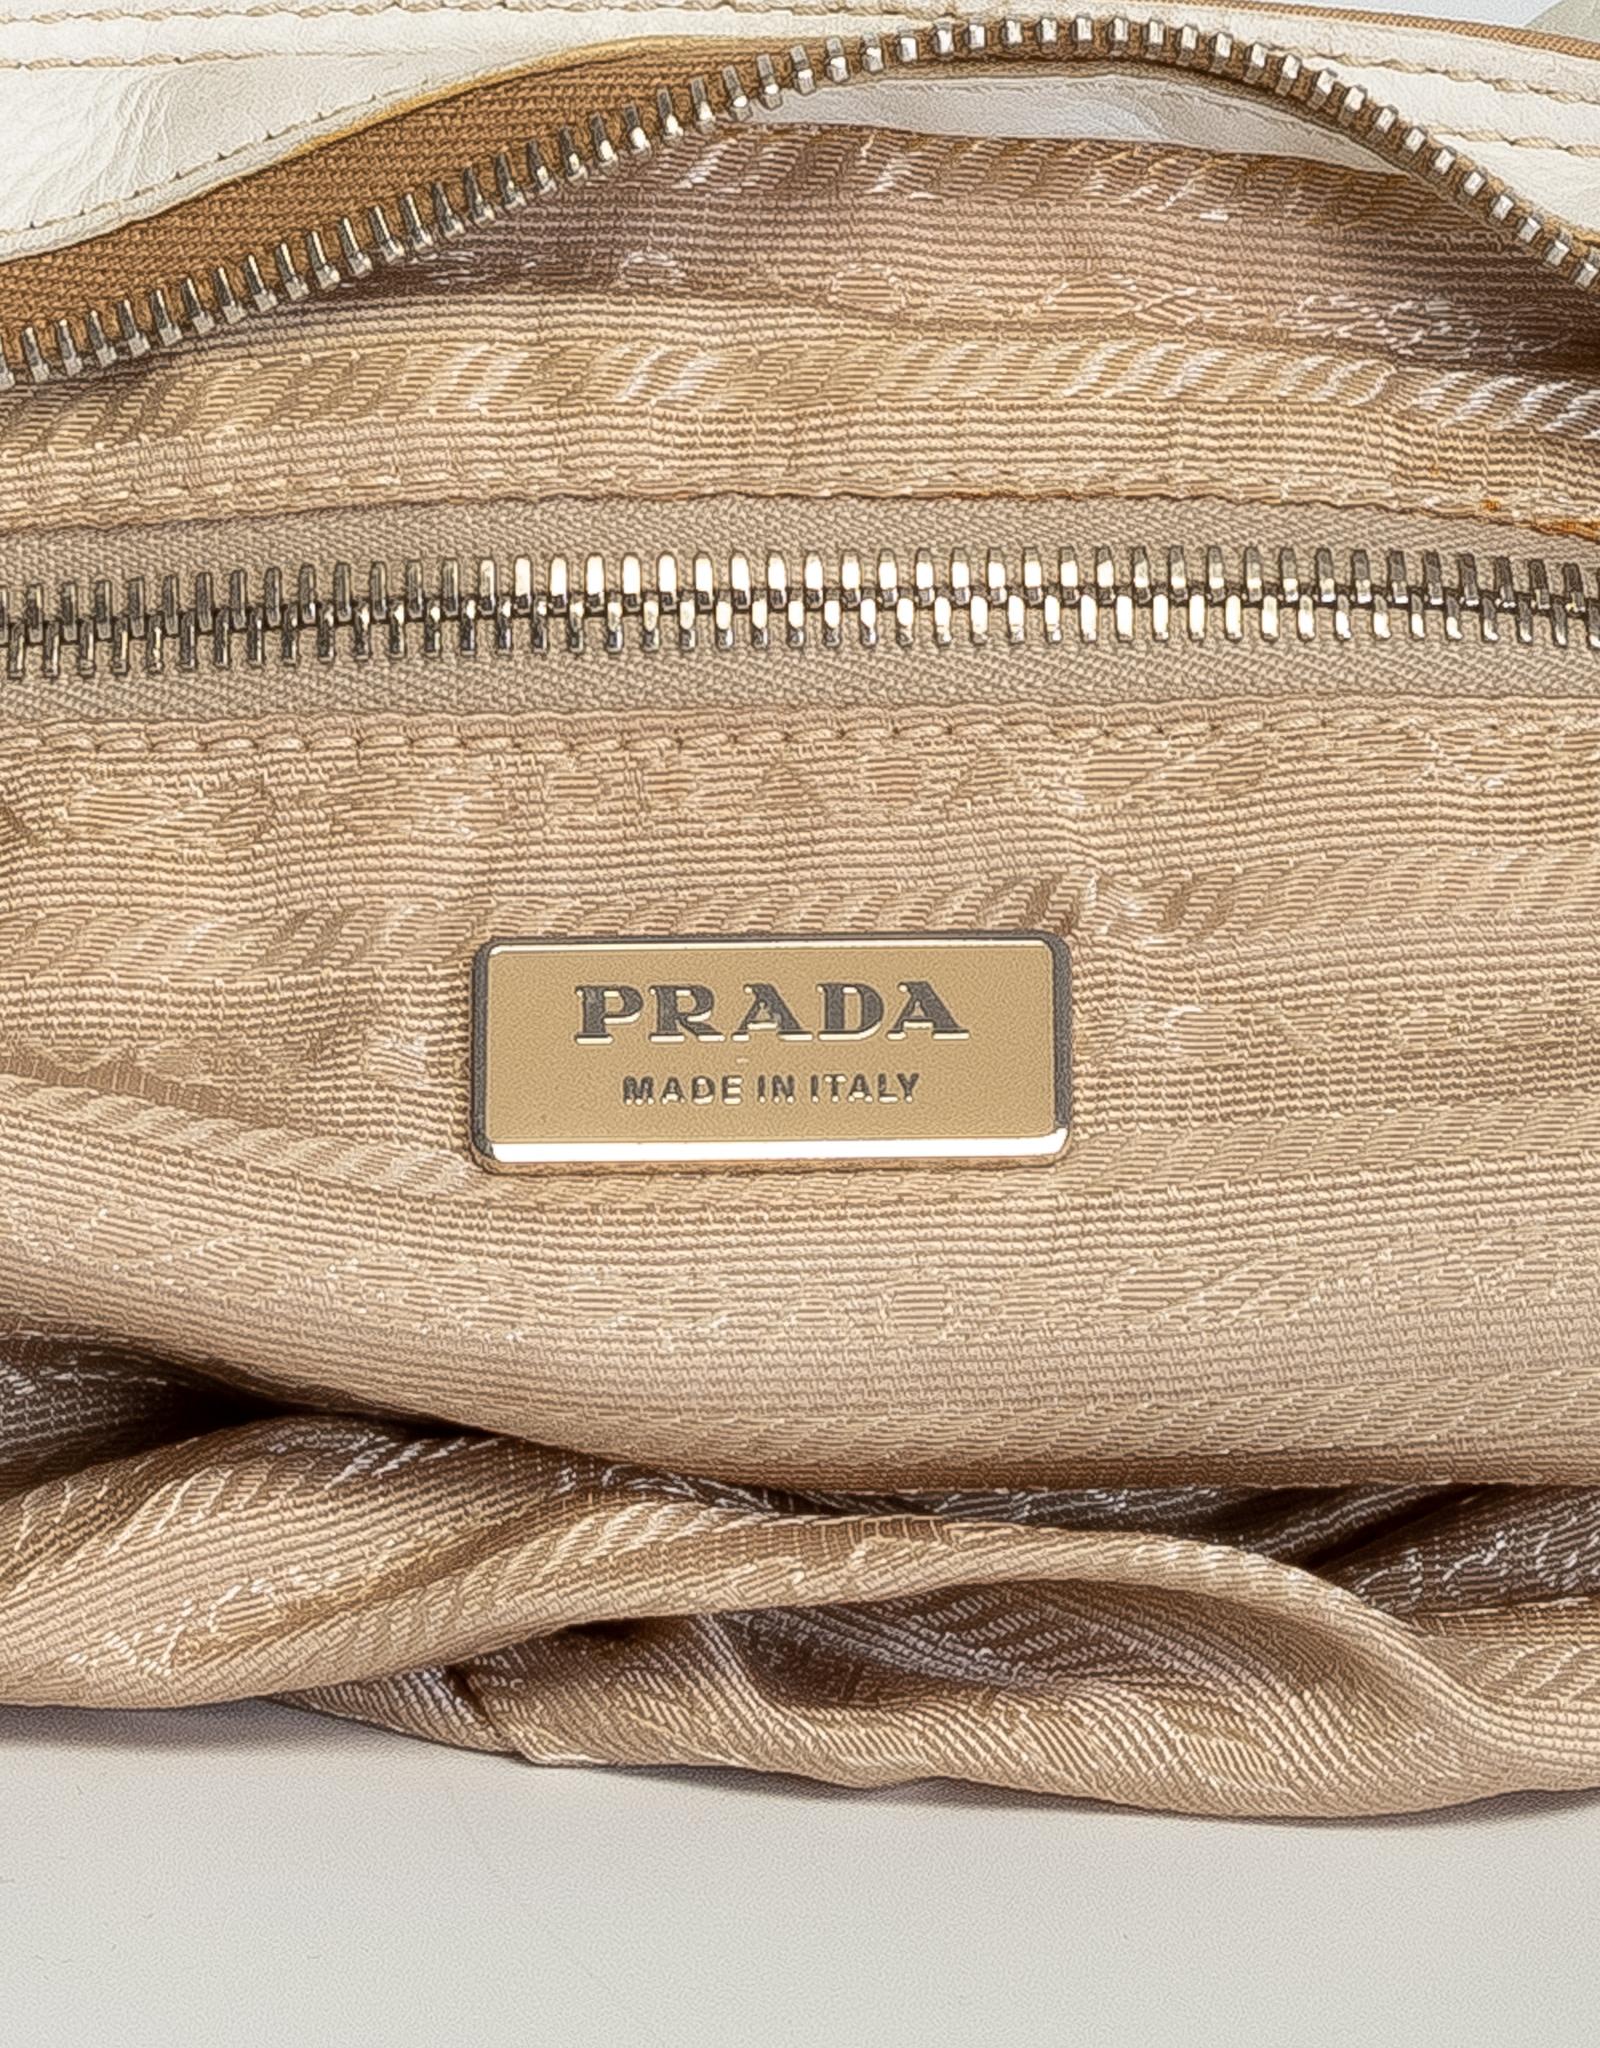 Prada Vintage Tessuto Buckle Beige Crossbody Bag In Good Condition For Sale In Montreal, Quebec